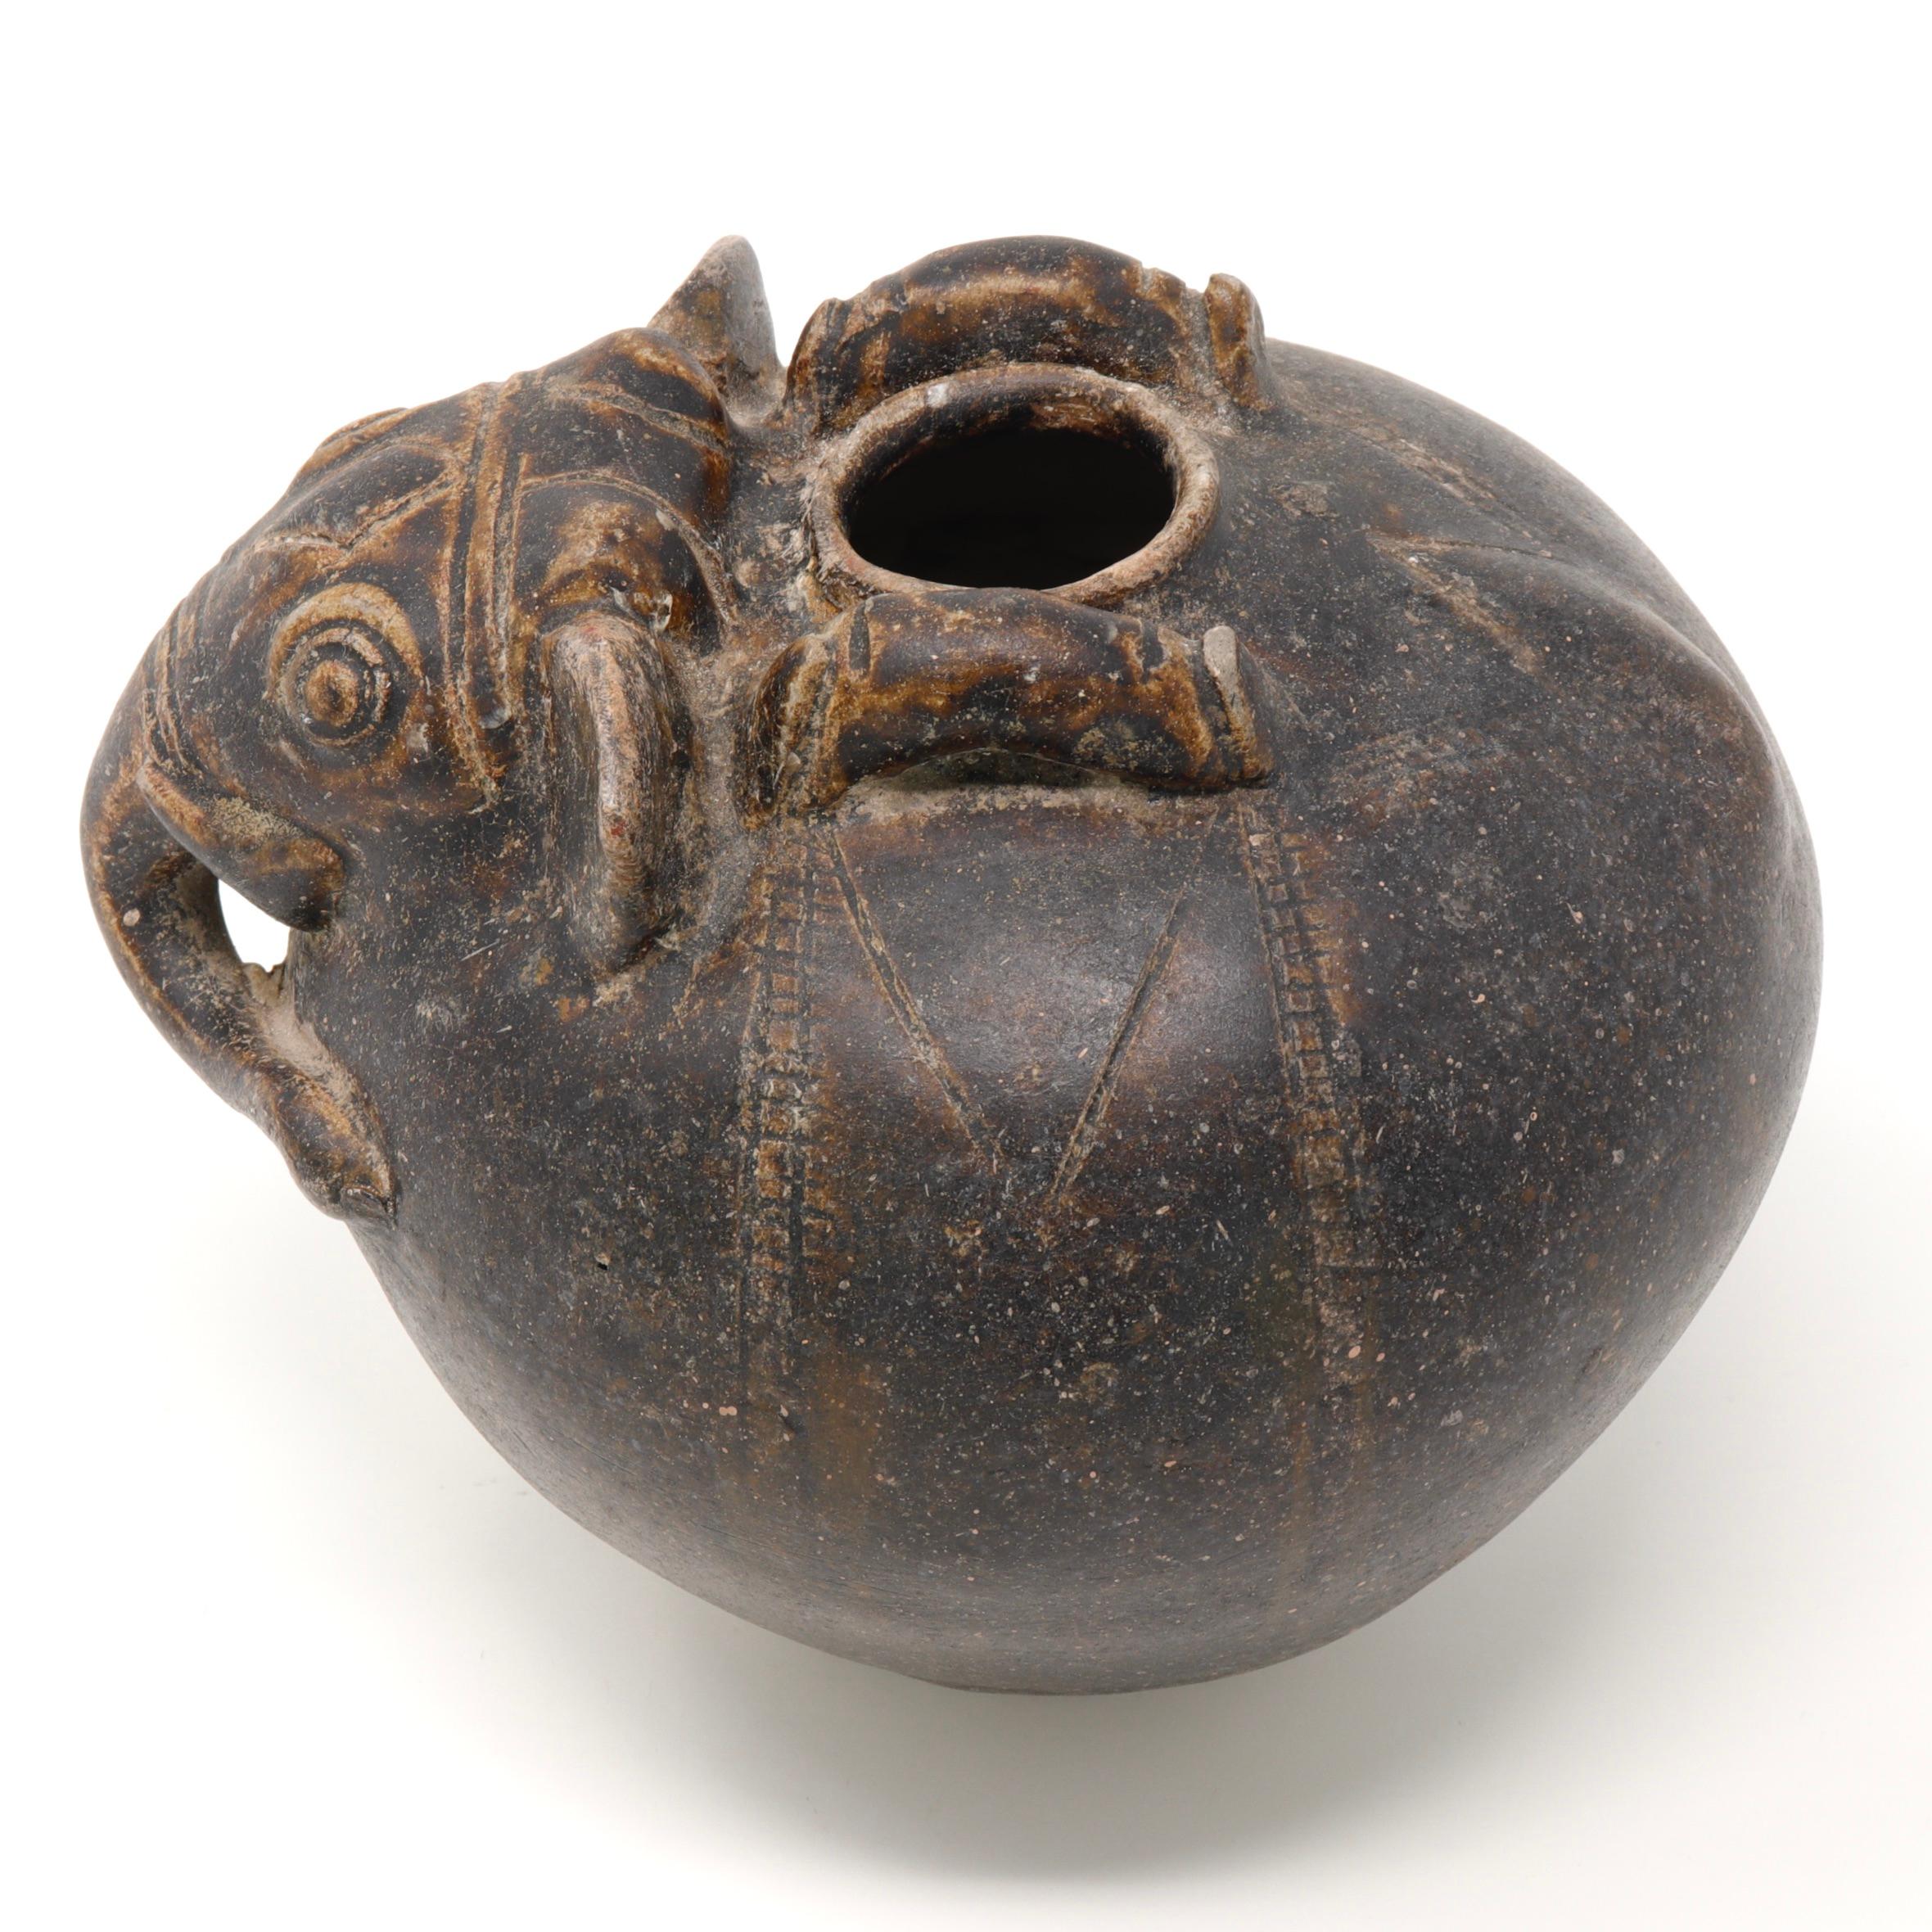 Khmer Elephant Form Lime Pot, 12th century. A globular stoneware form with narrow aperture on top for the slaked lime. The pot modeled after an elephant’s head at the shoulder with trunk, tusks and short ears and having incised markings and two